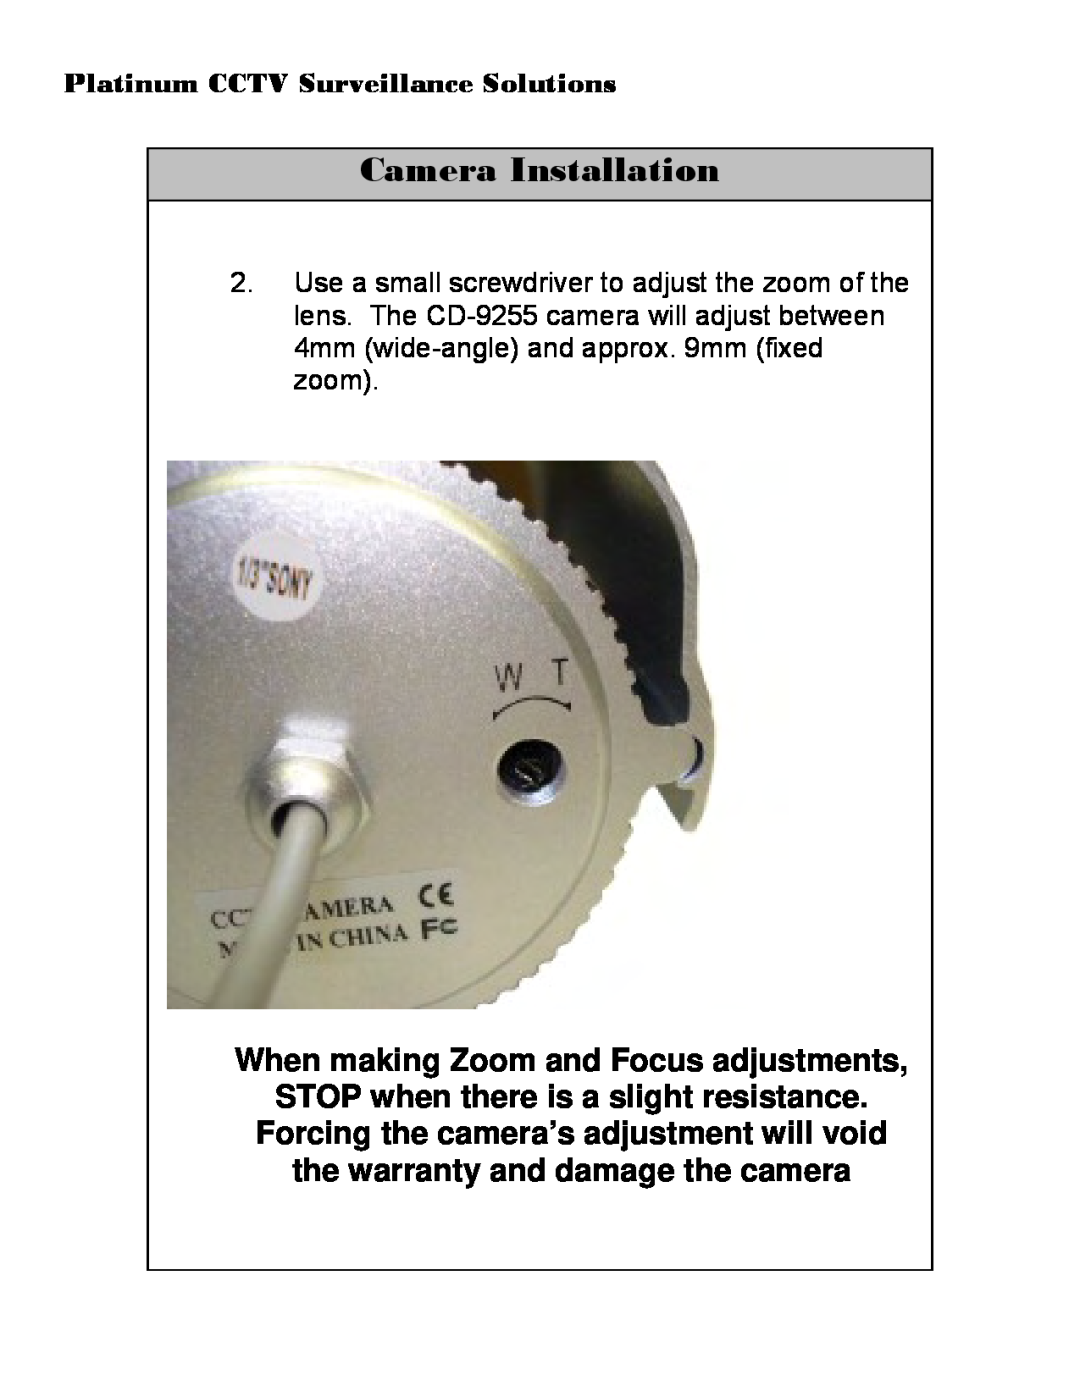 Sony CD-9255 When making Zoom and Focus adjustments, Camera Installation, Platinum CCTV Surveillance Solutions 